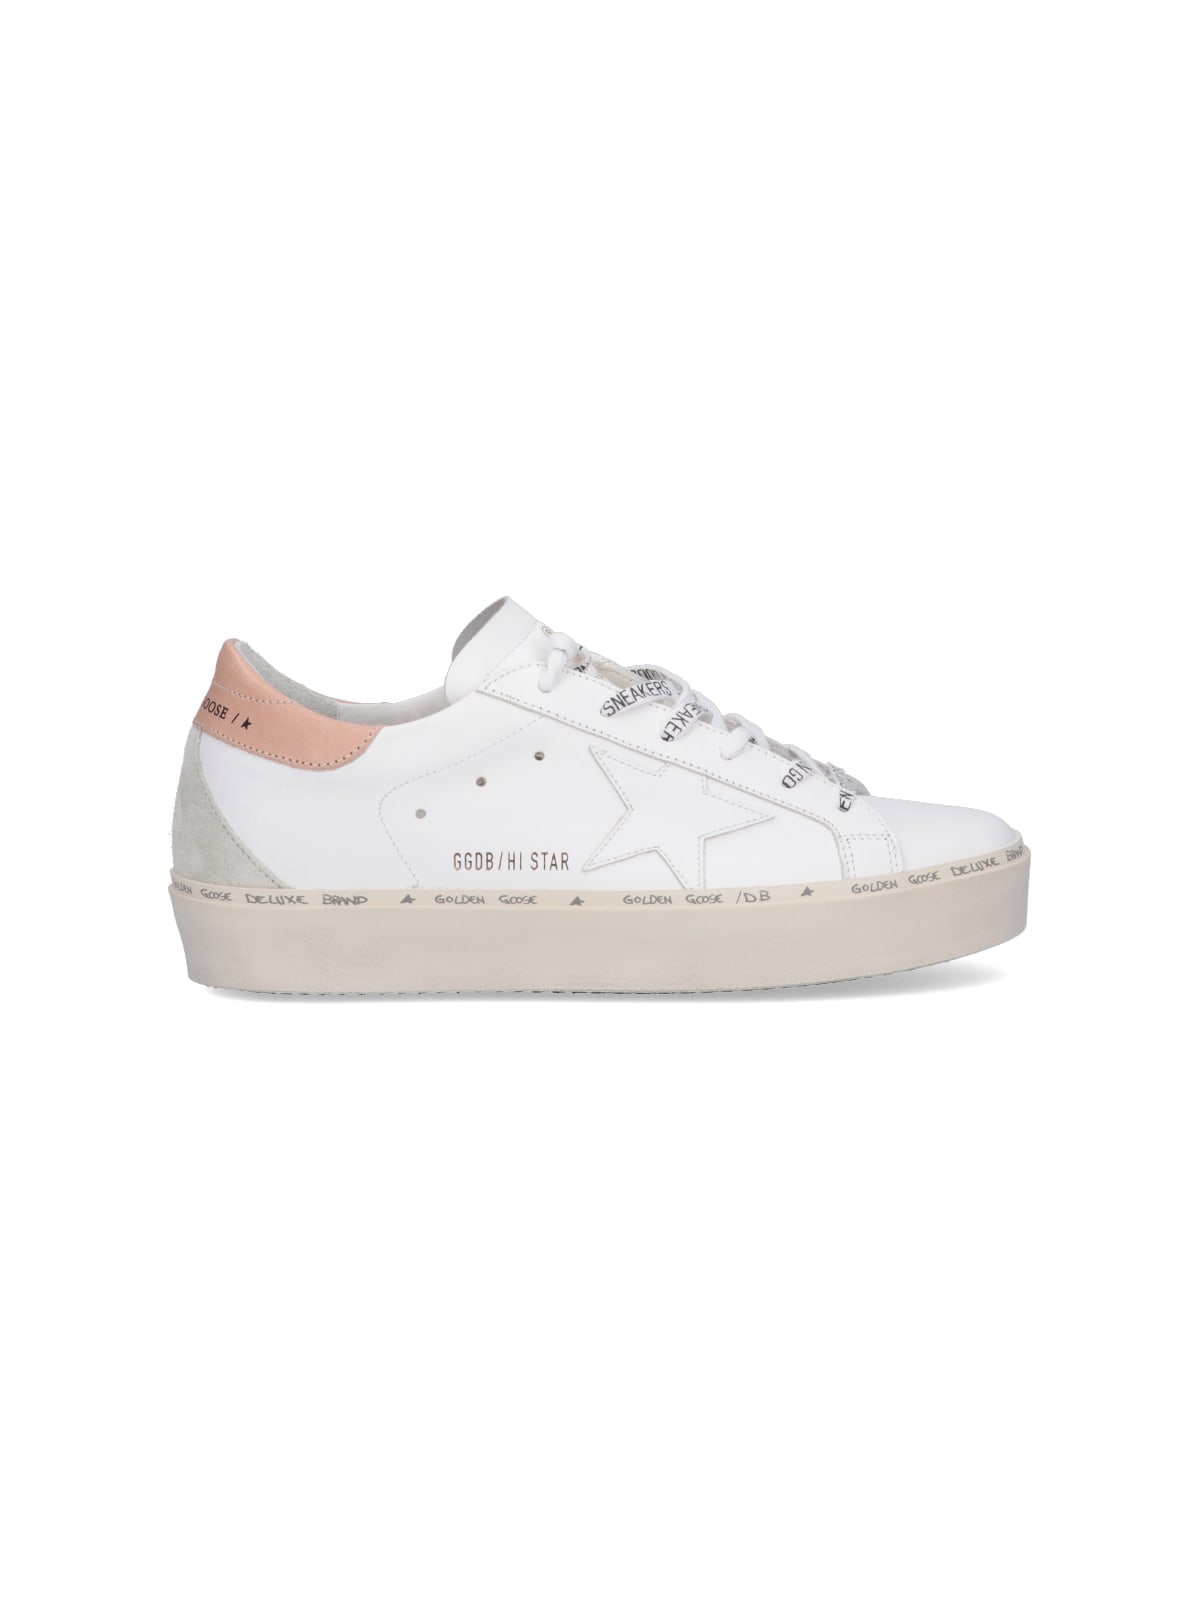 Hi-star Leather Sneakers